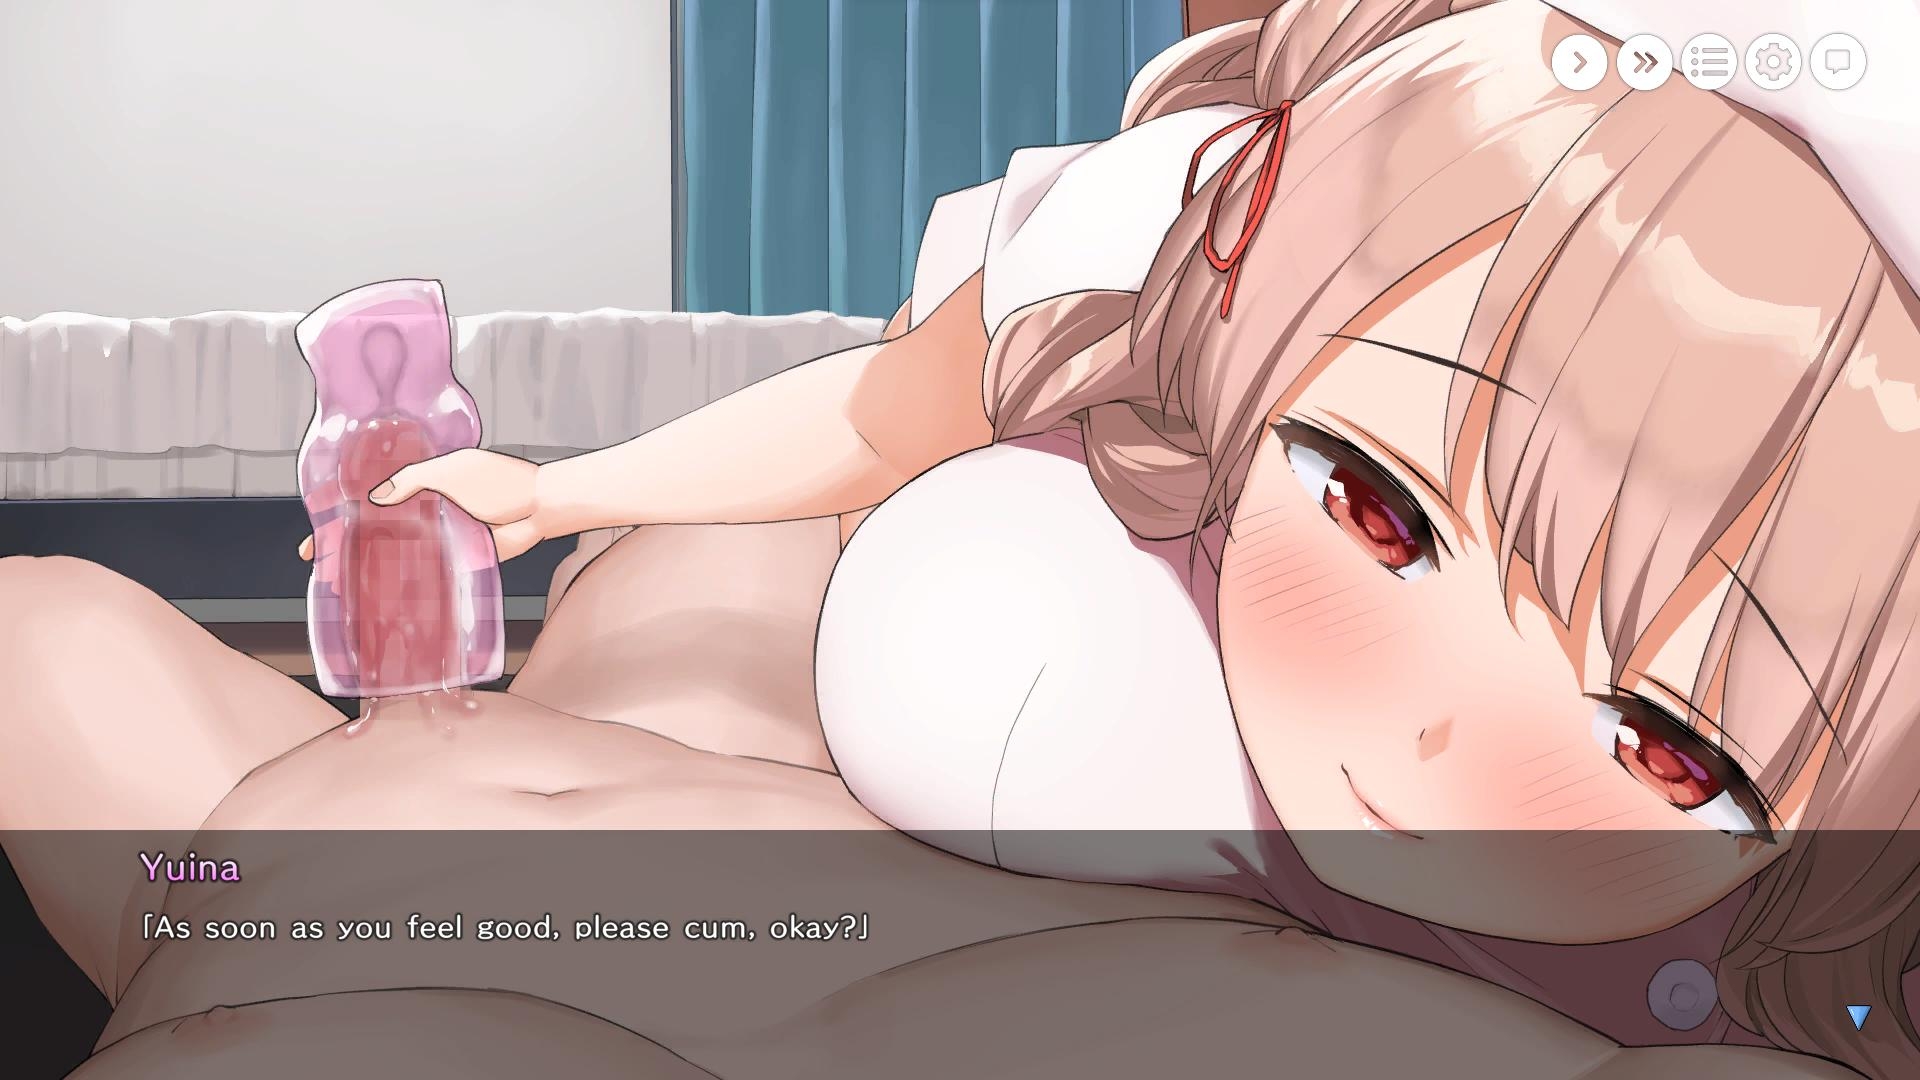 [ENG Ver.] With An Older Girl ~More of Yuina's Sweet Encouragement~ Complete Pack